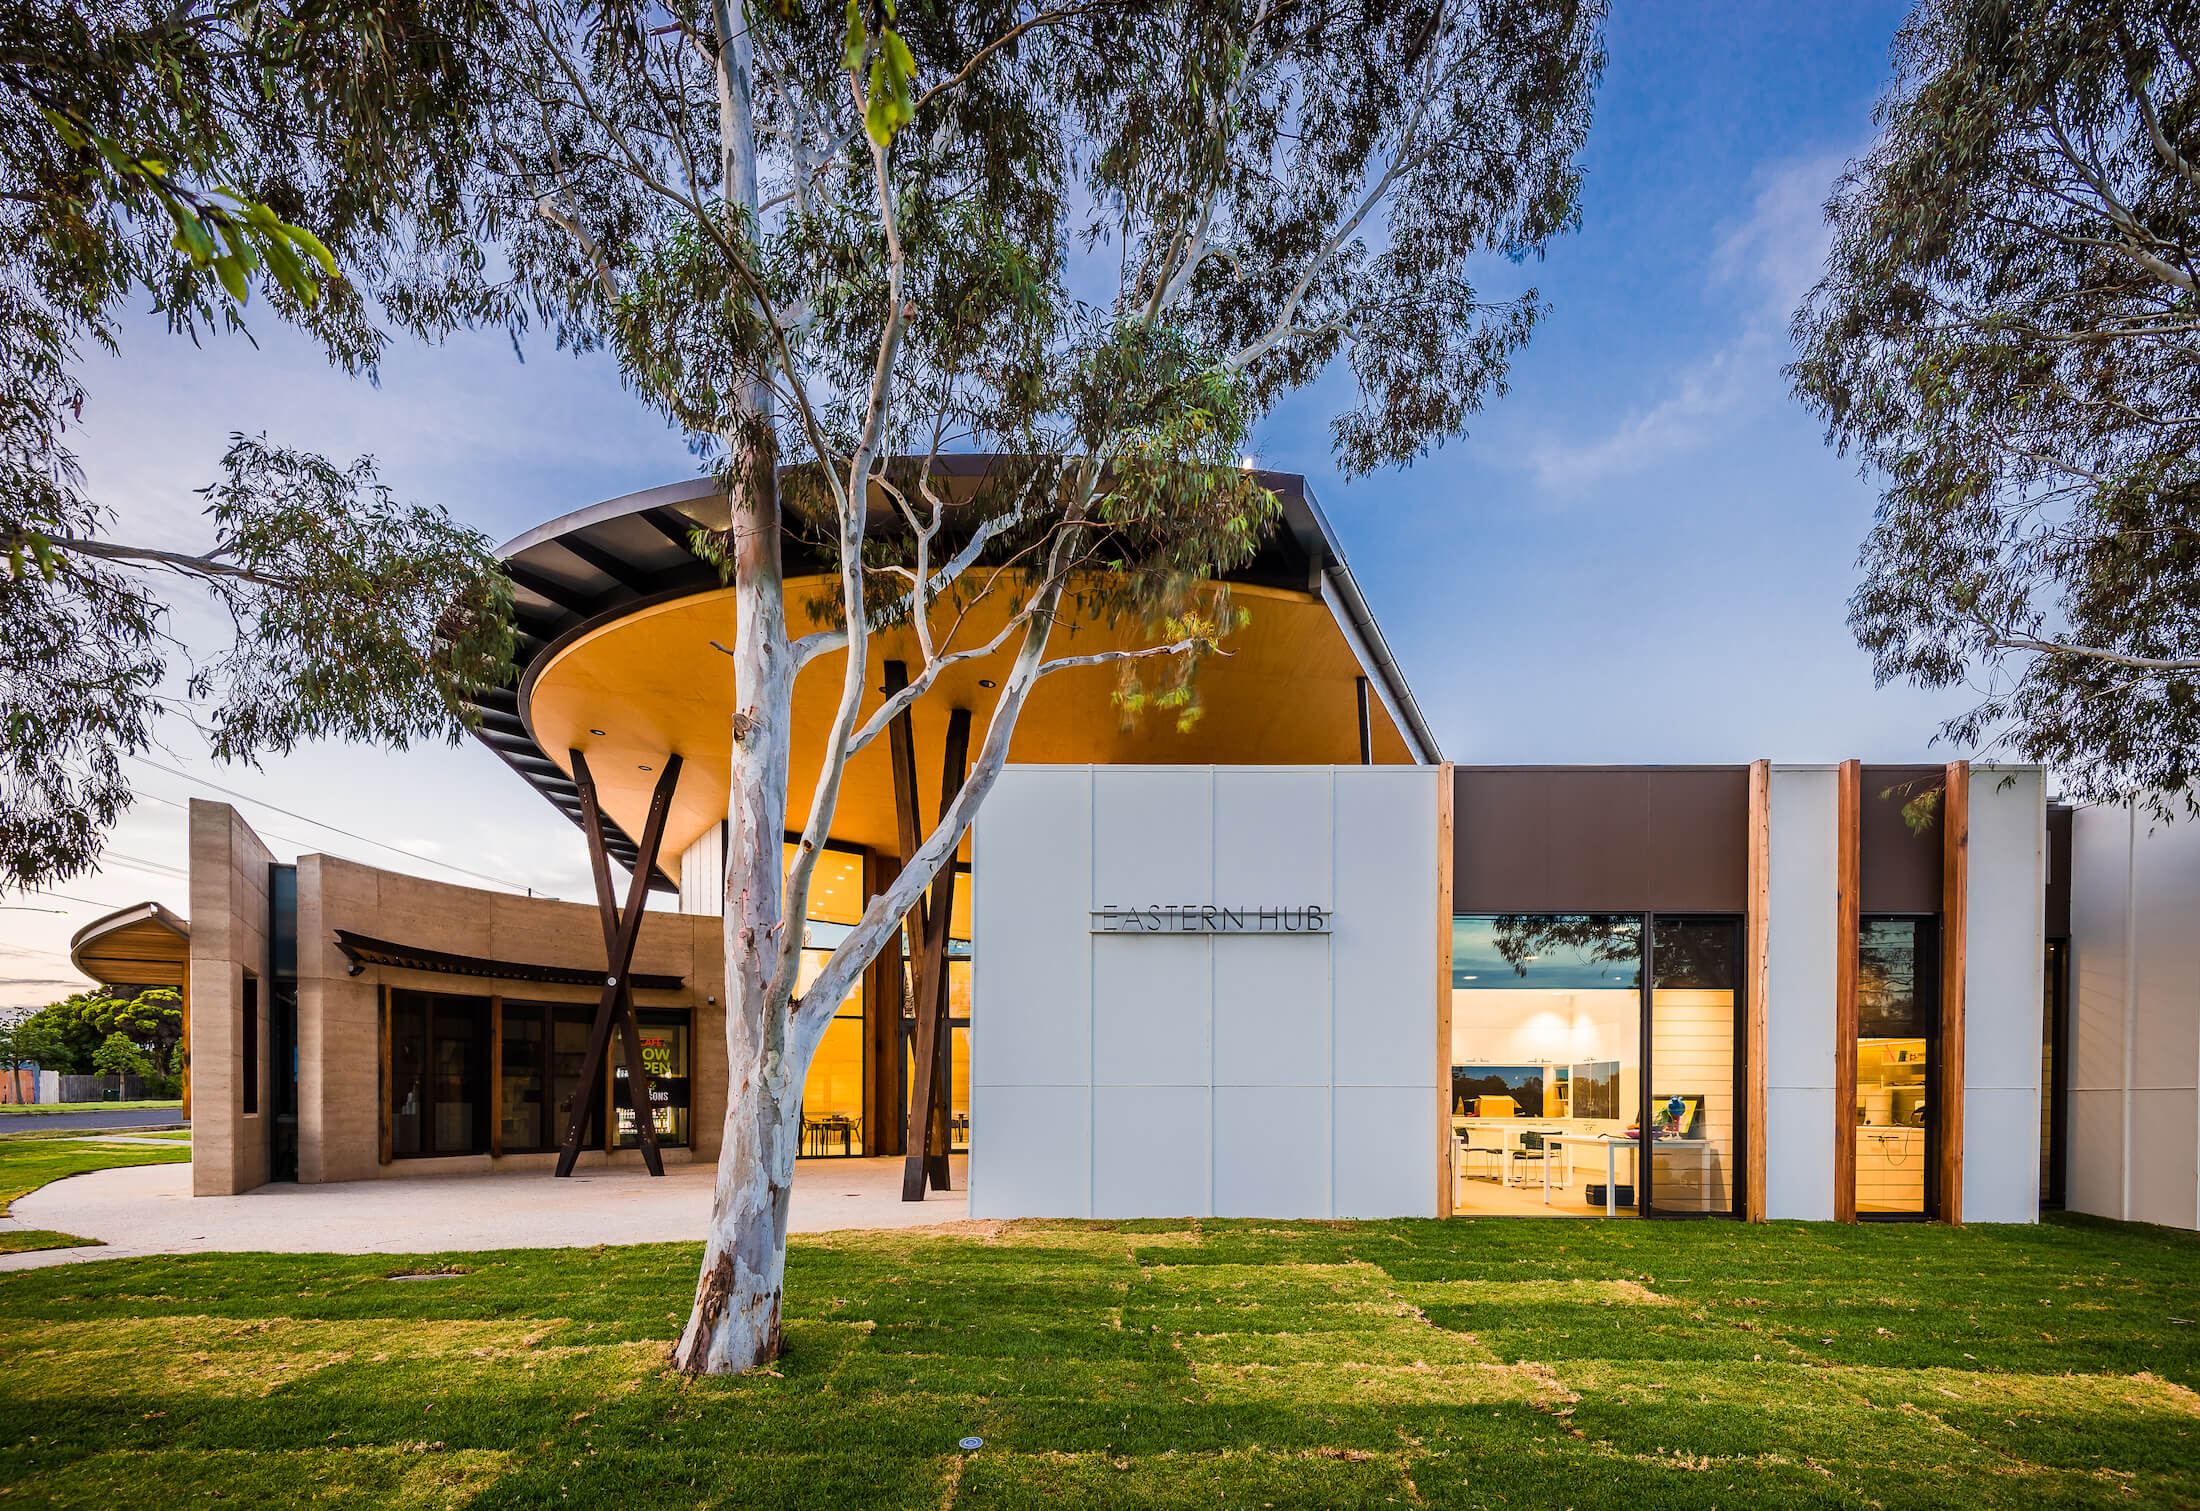 Front view of Eastern Hub community centre with canopy over forecourt and gum trees in the lawn